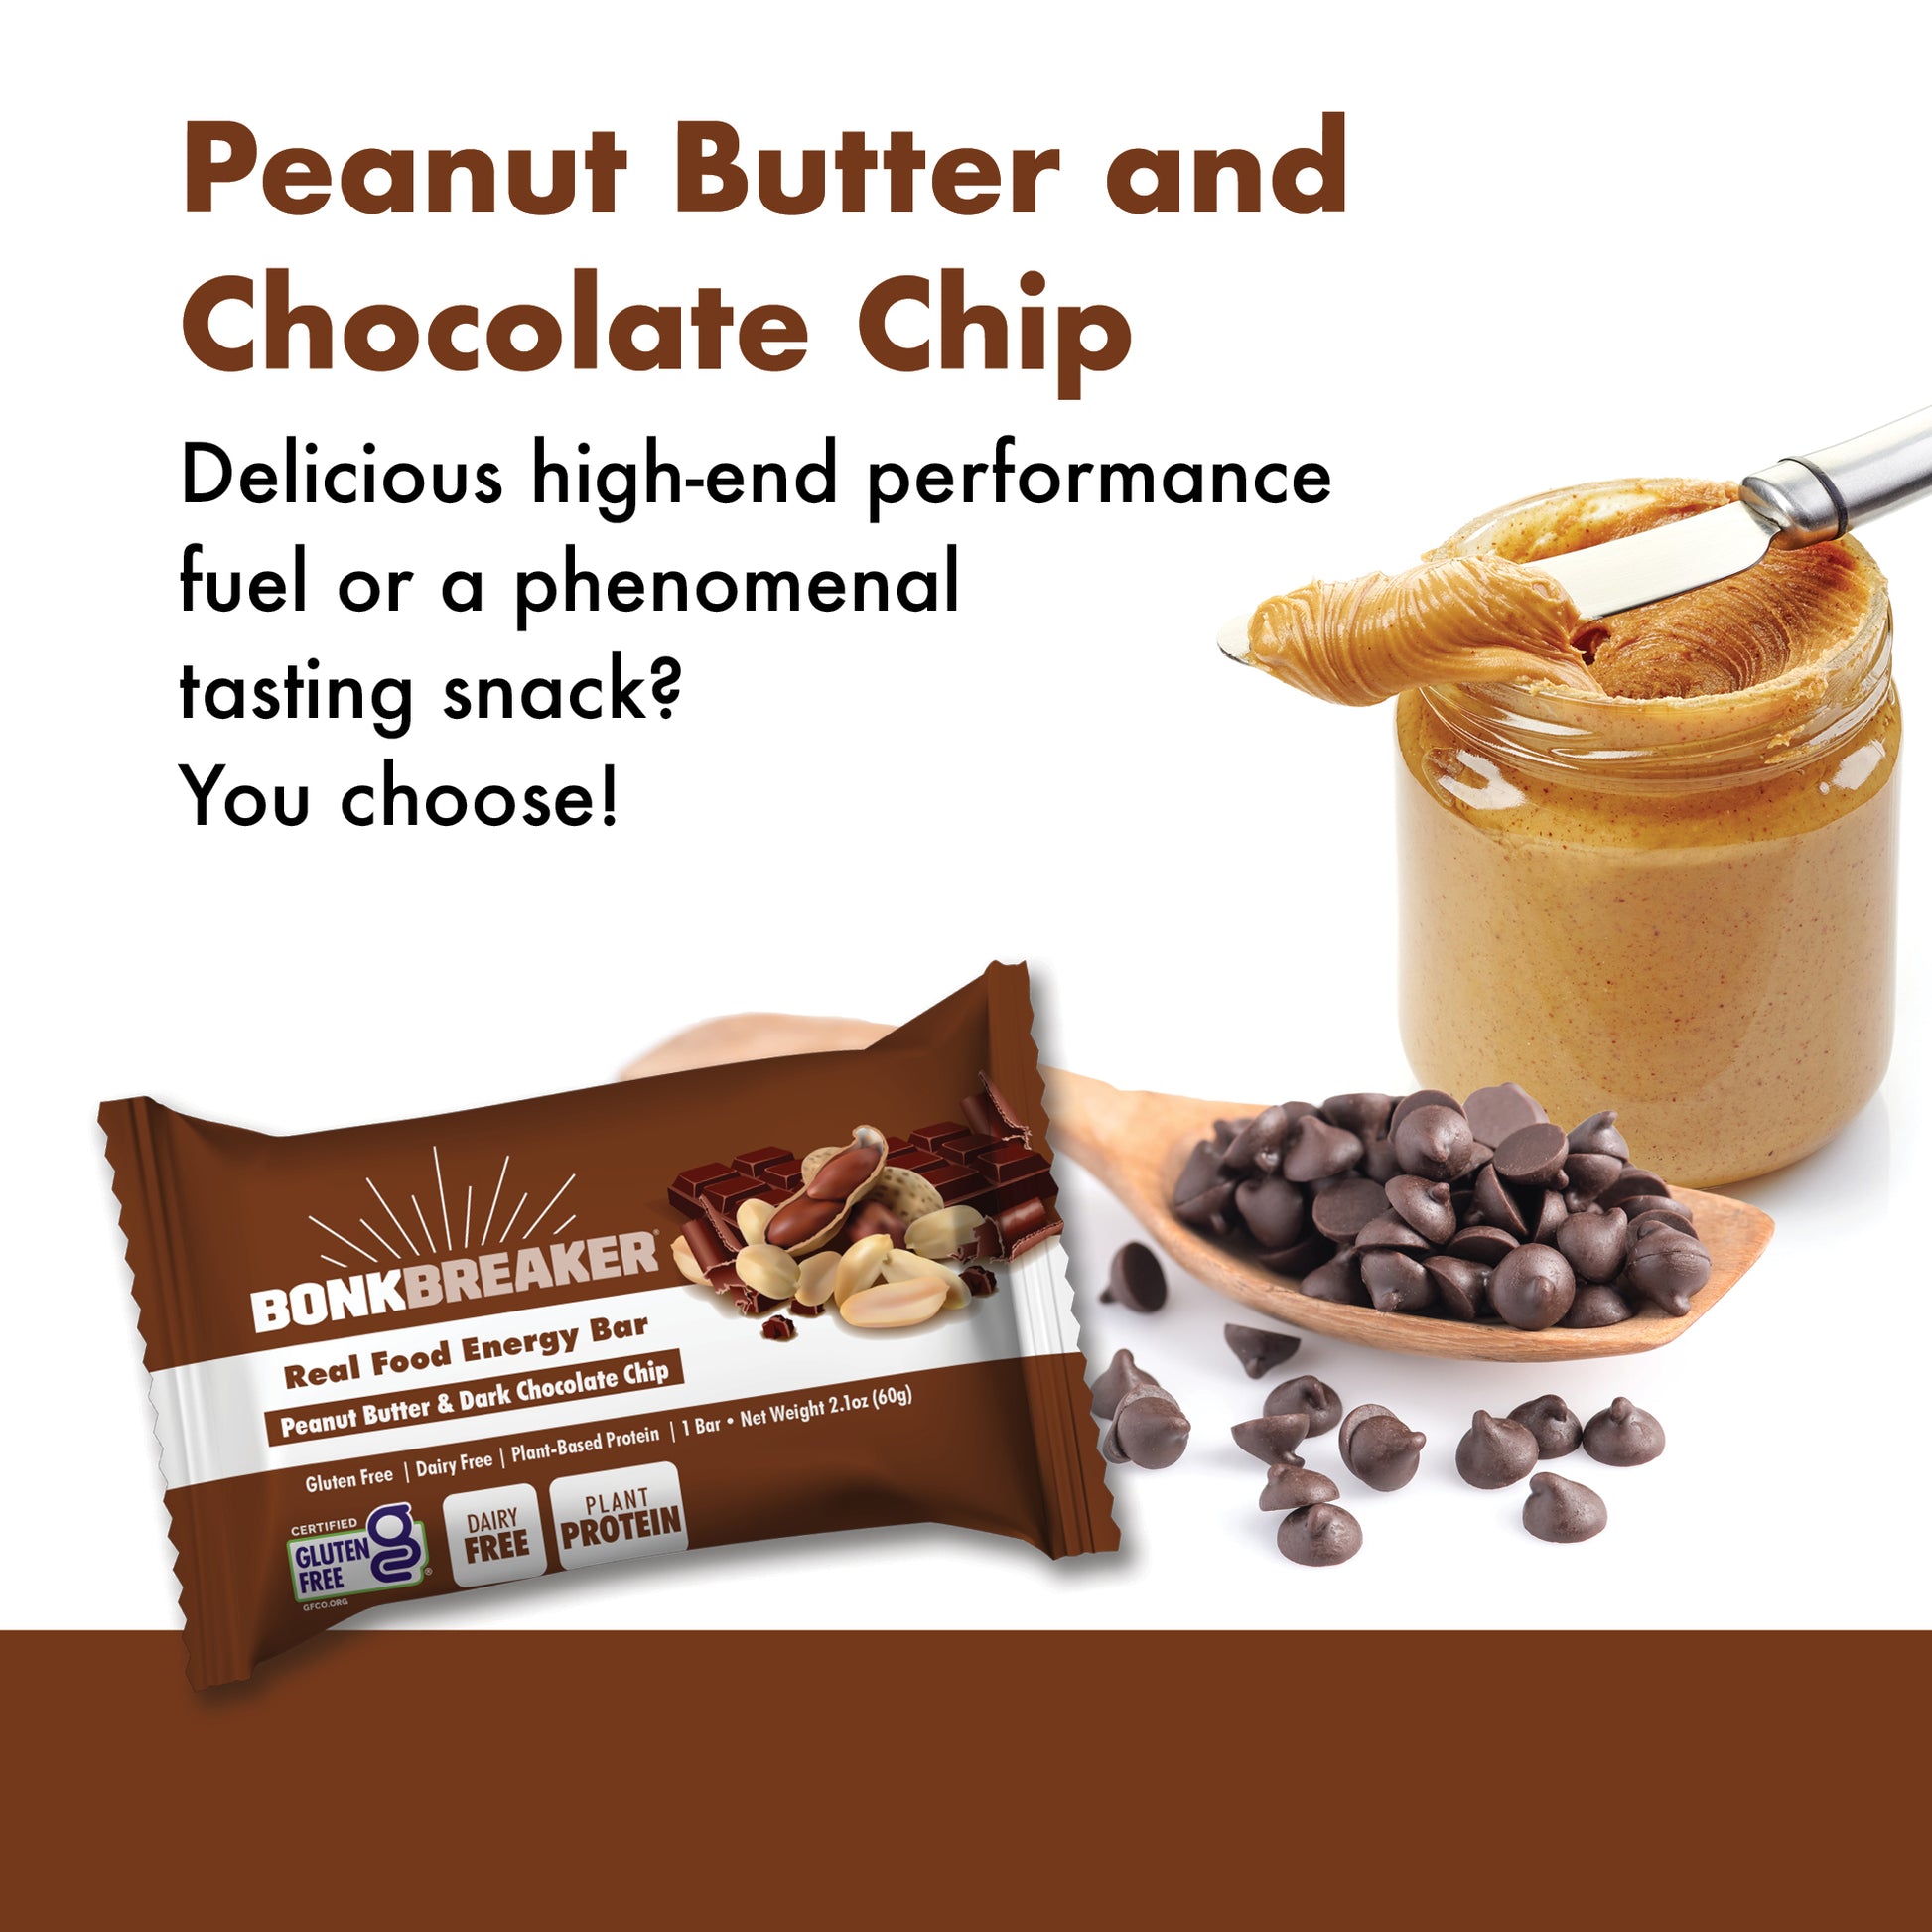 Delicious high-end performance fuel or a phenomenal tasting snack? You choose!